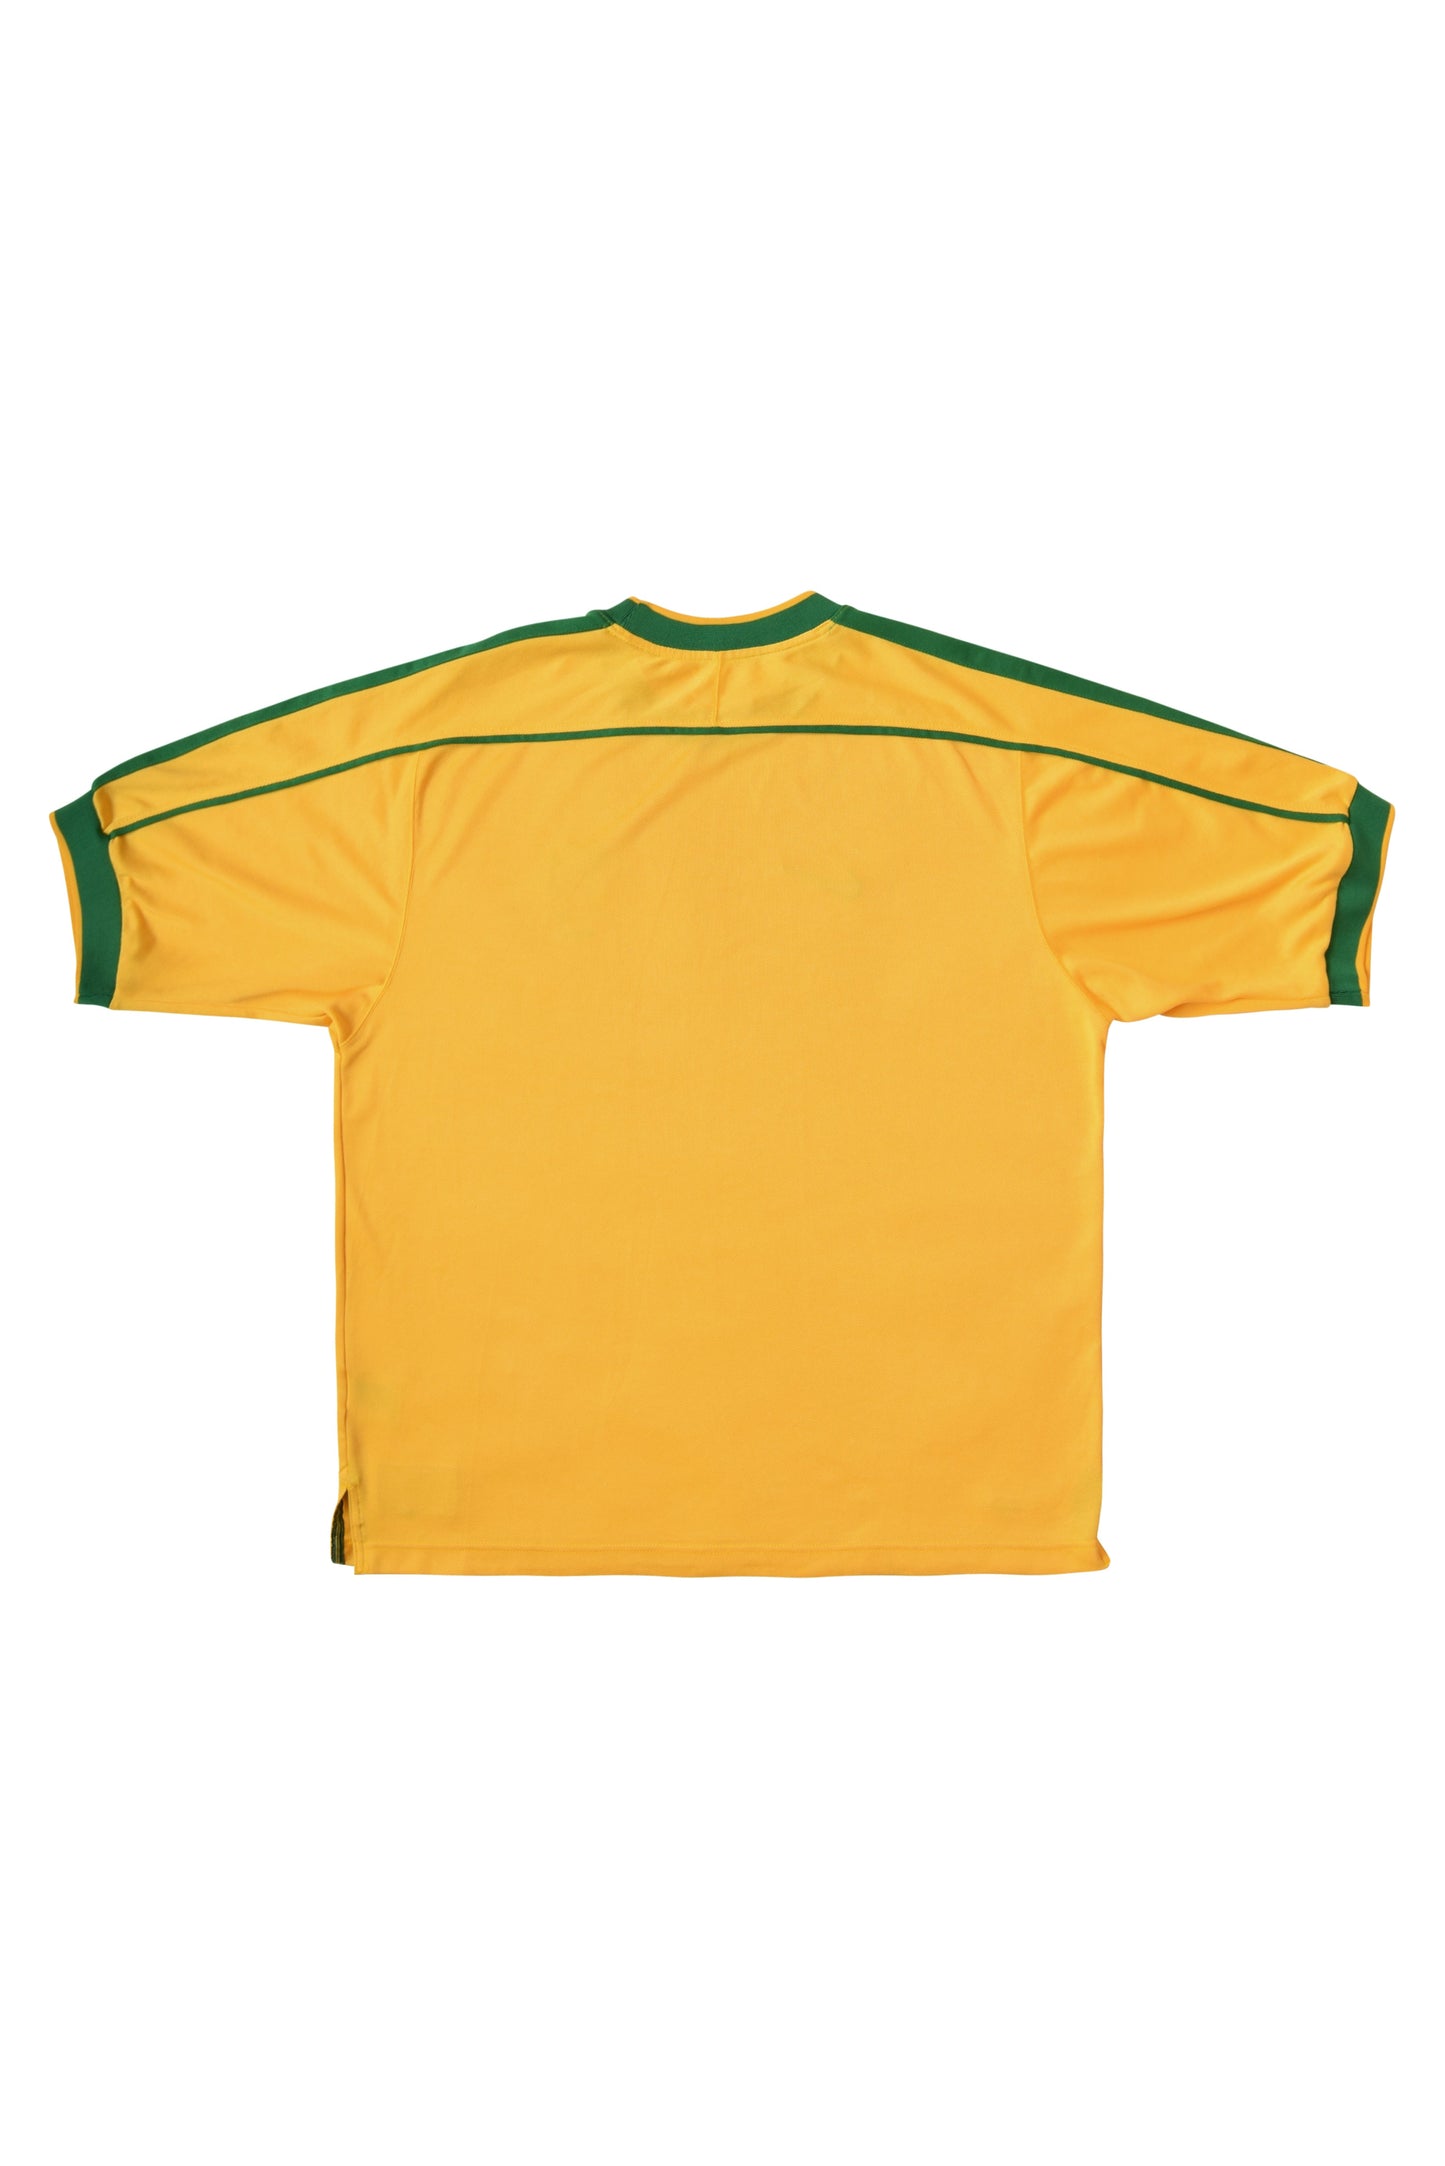 Vintage Nike Brazil 1998 - 2000 Home Football Shirt Size L Made in UK Yellow Green 